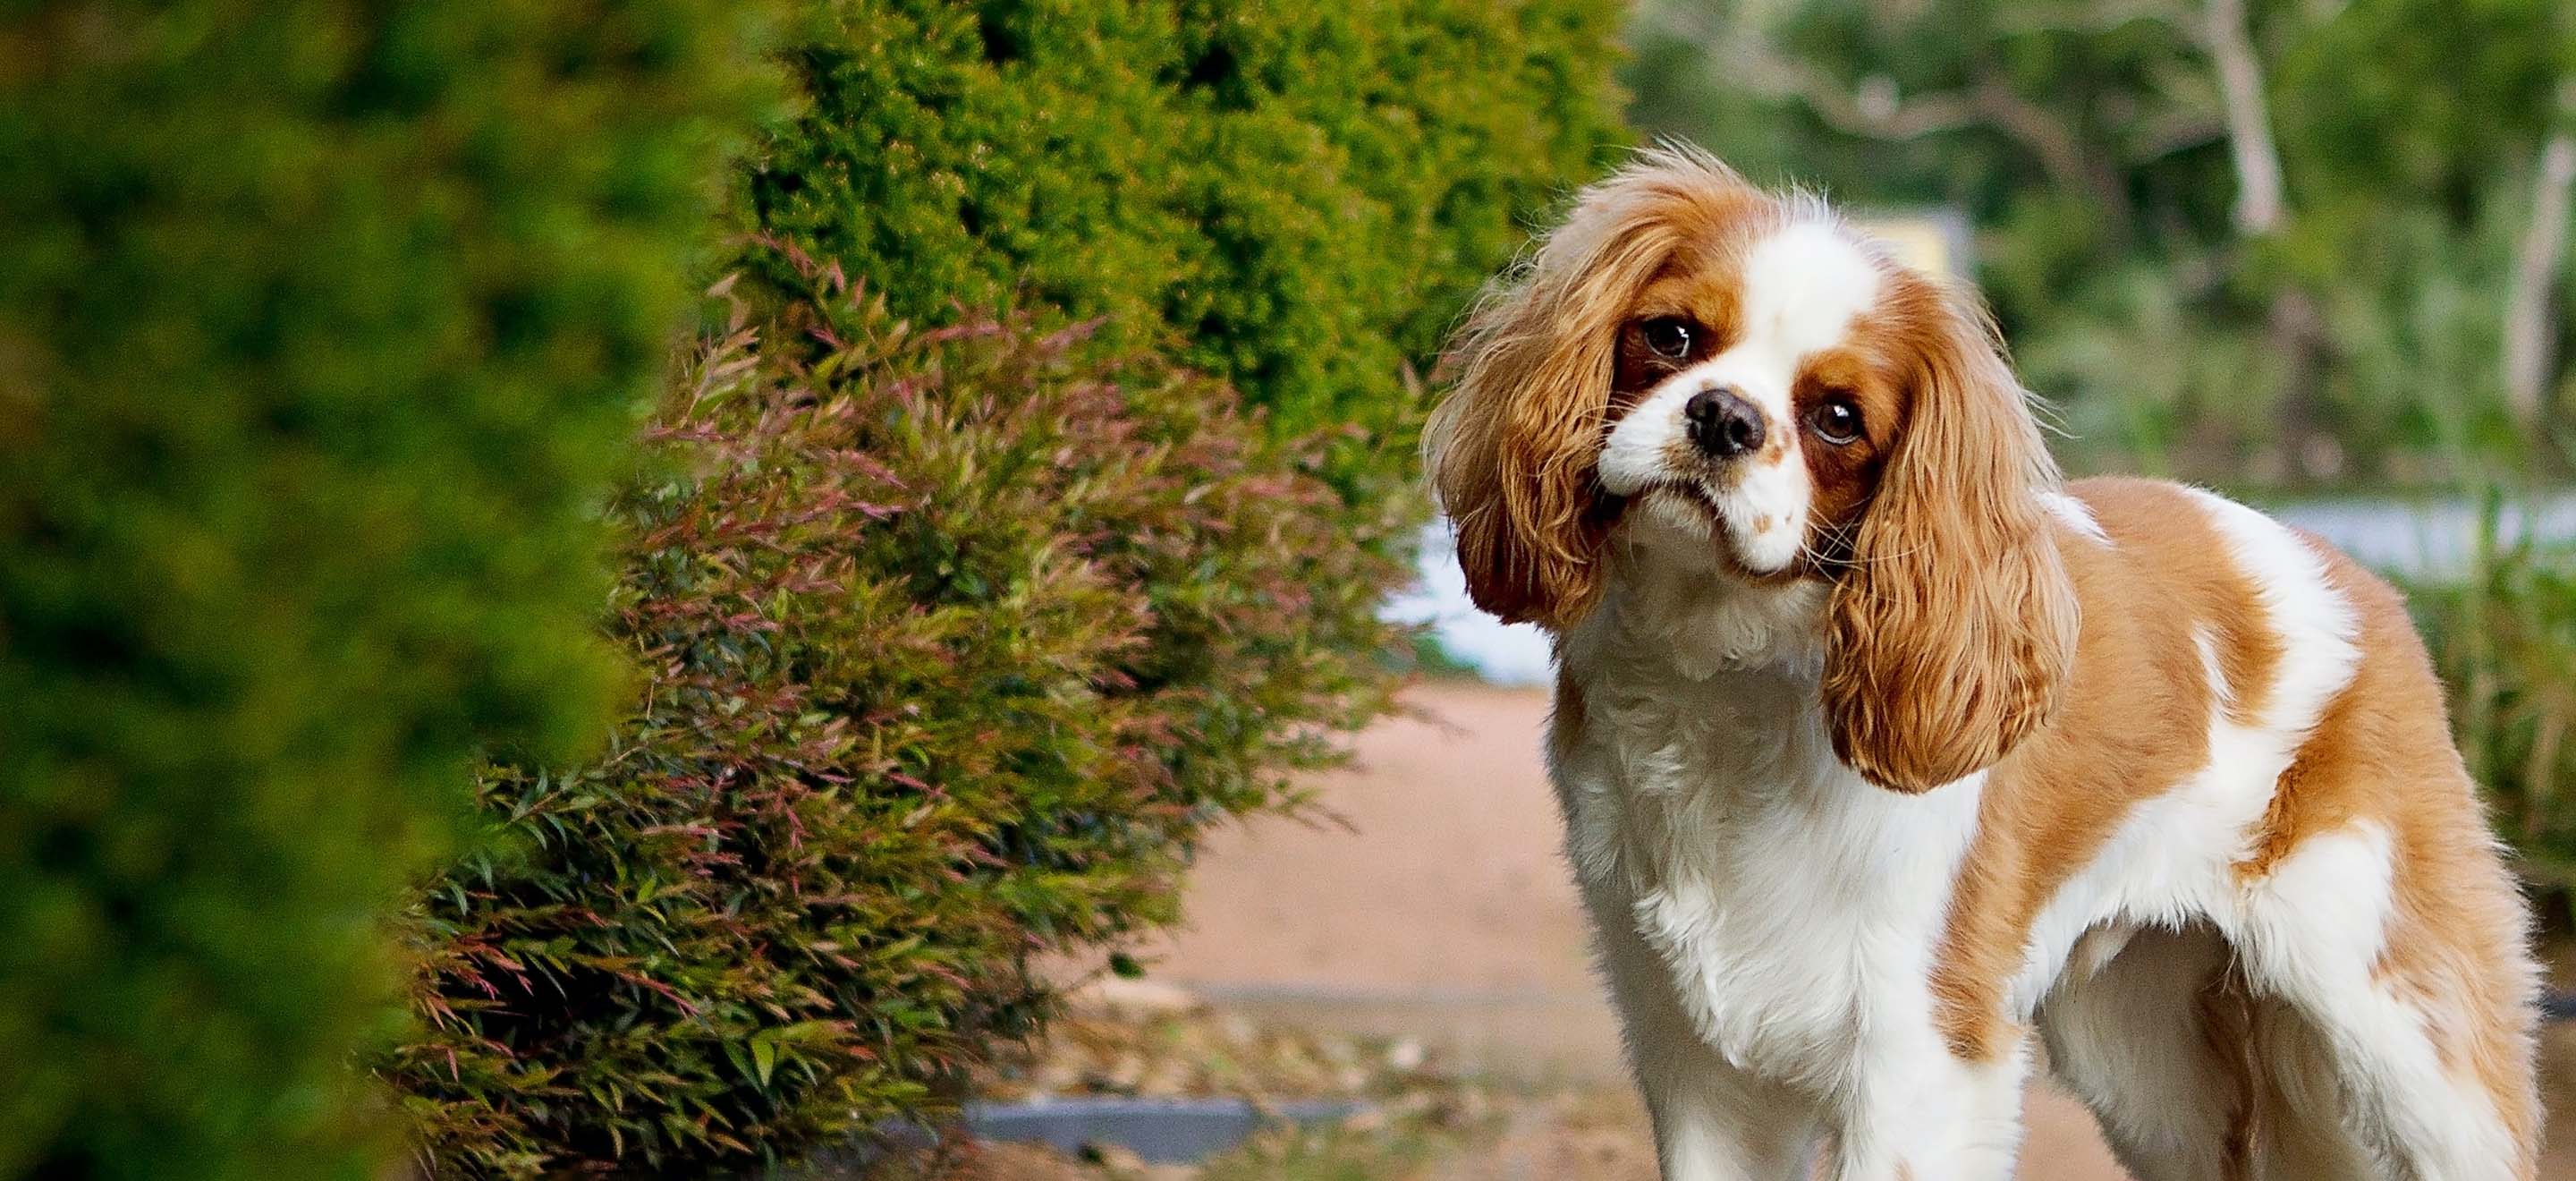 A white and tan dog with head tilted standing near a hedge outside image